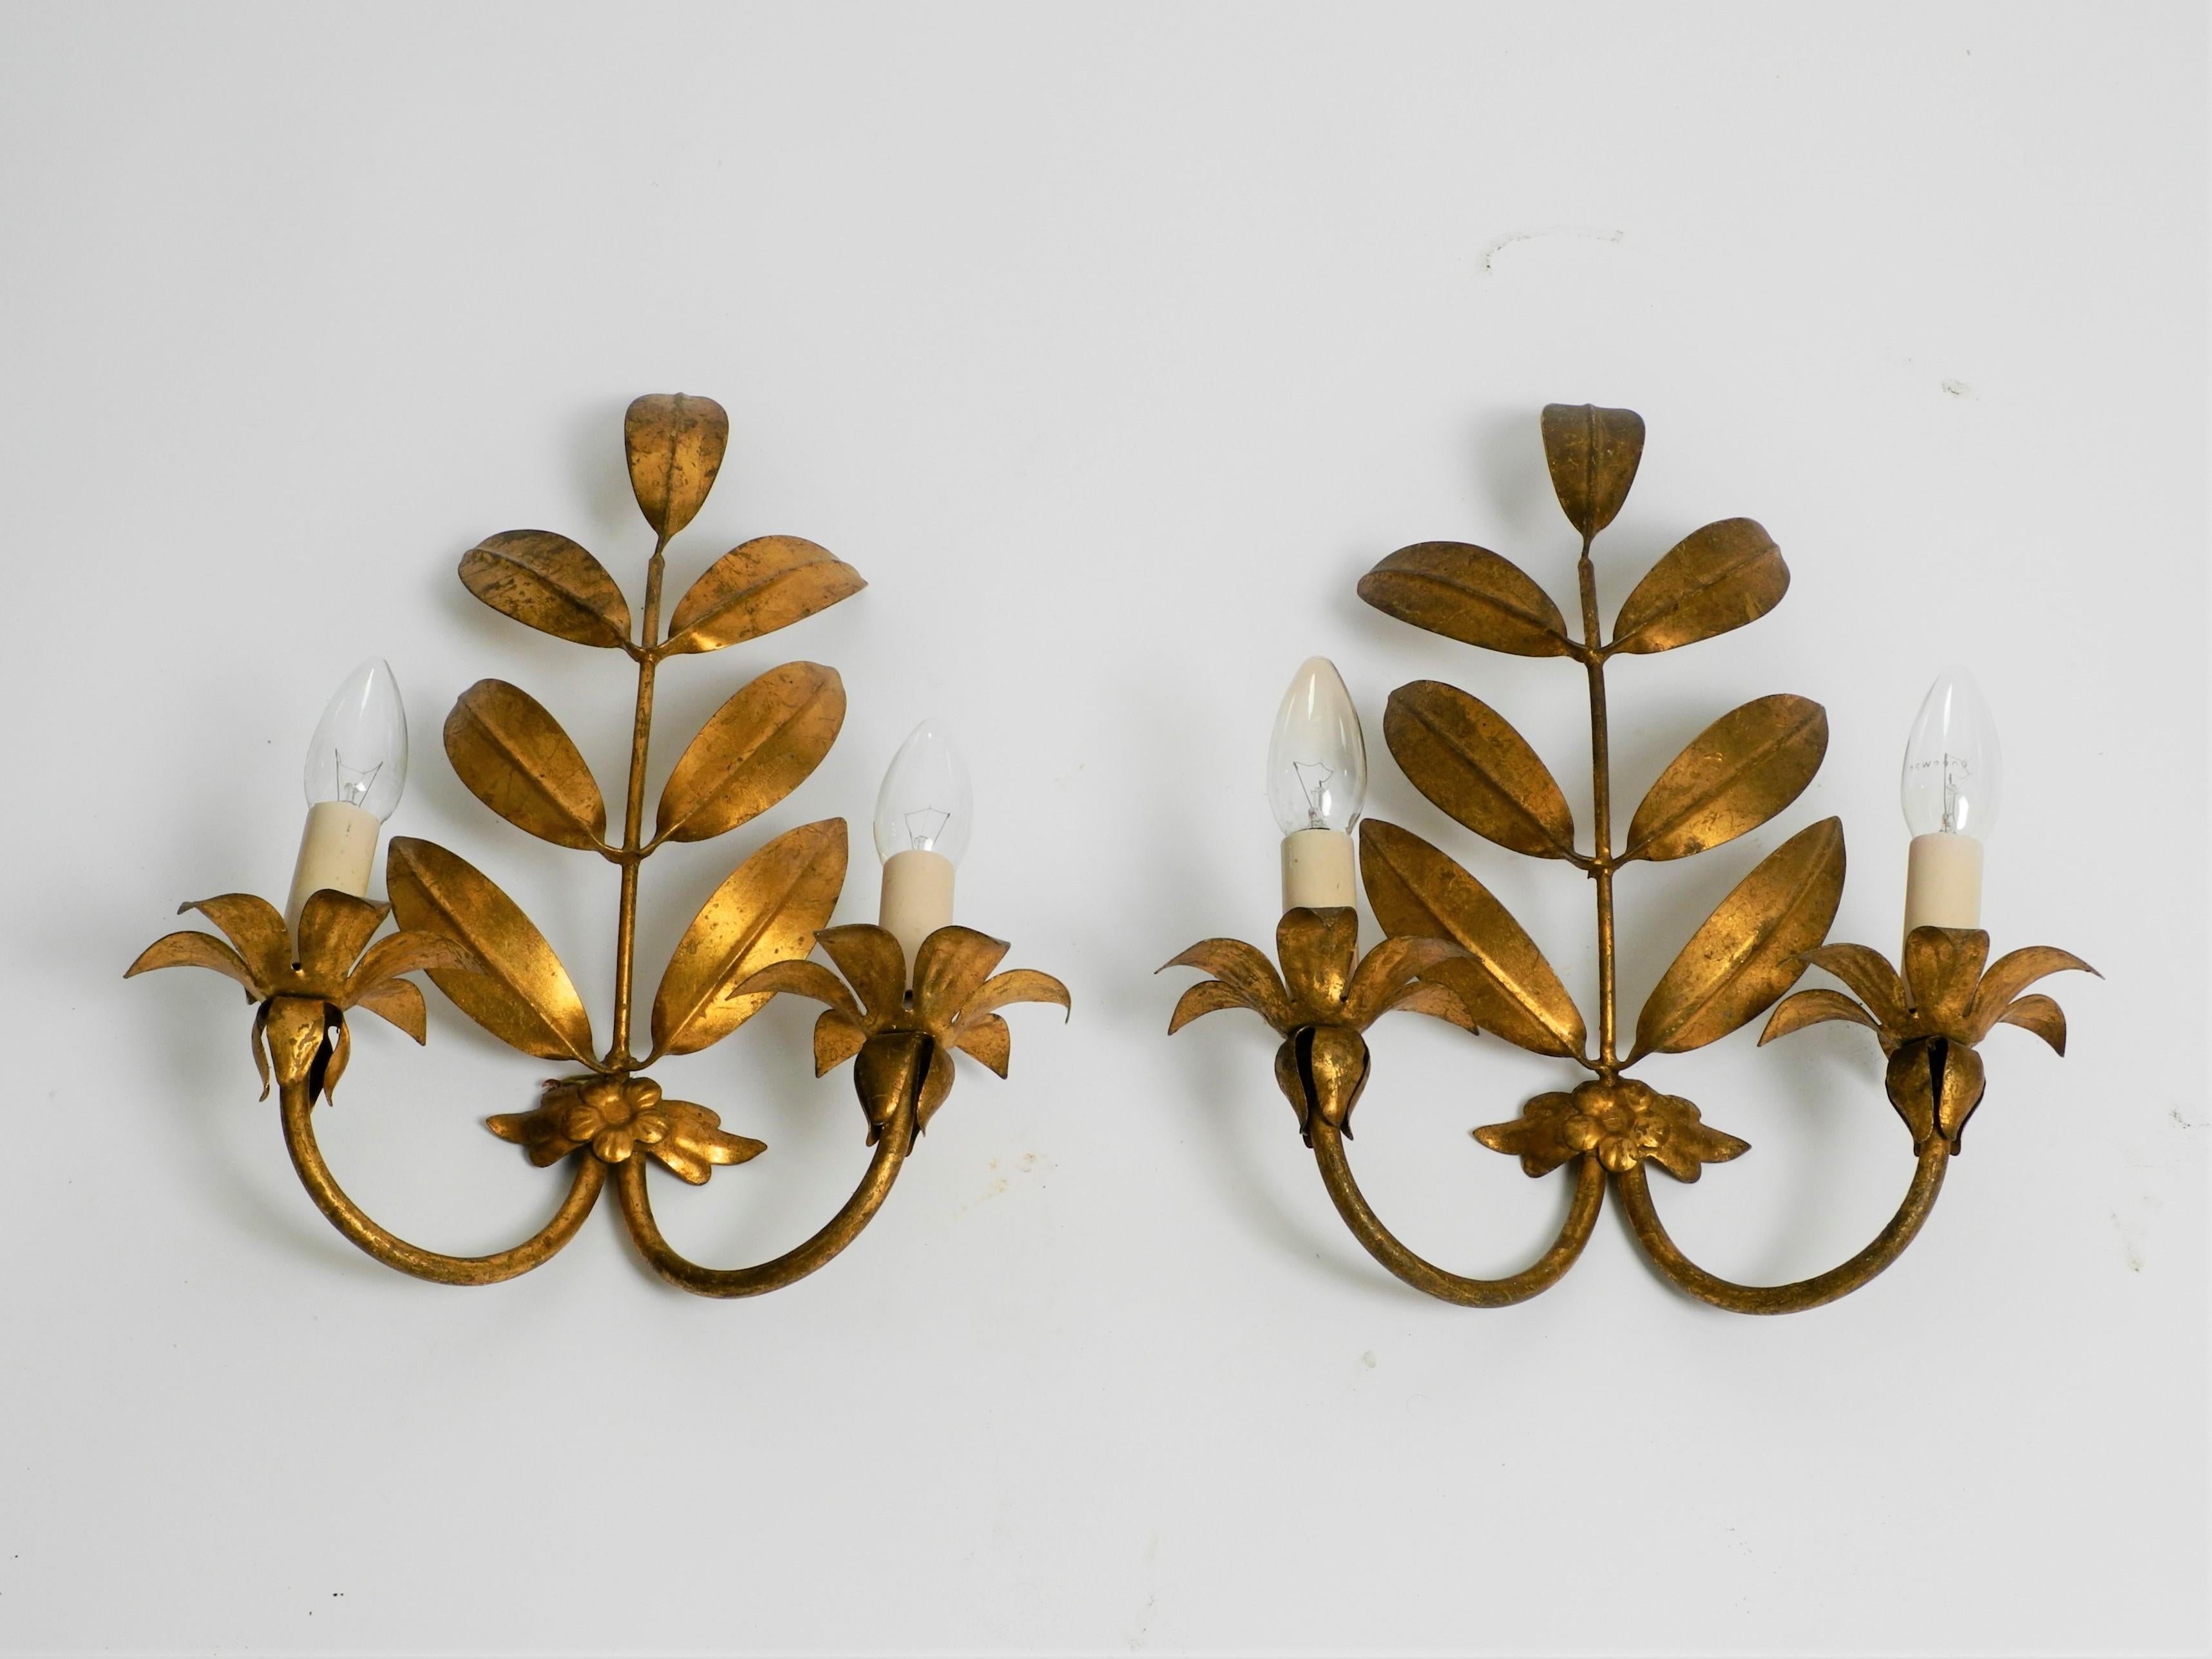 Pair of rare 1960s large Florentine wall lamps, made in Italy.
Many large curved leaves. Very high quality production. Beautiful design with many derails.
Entire lamp is made of heavy gilded iron.
Fully functional and 100% original.
All parts